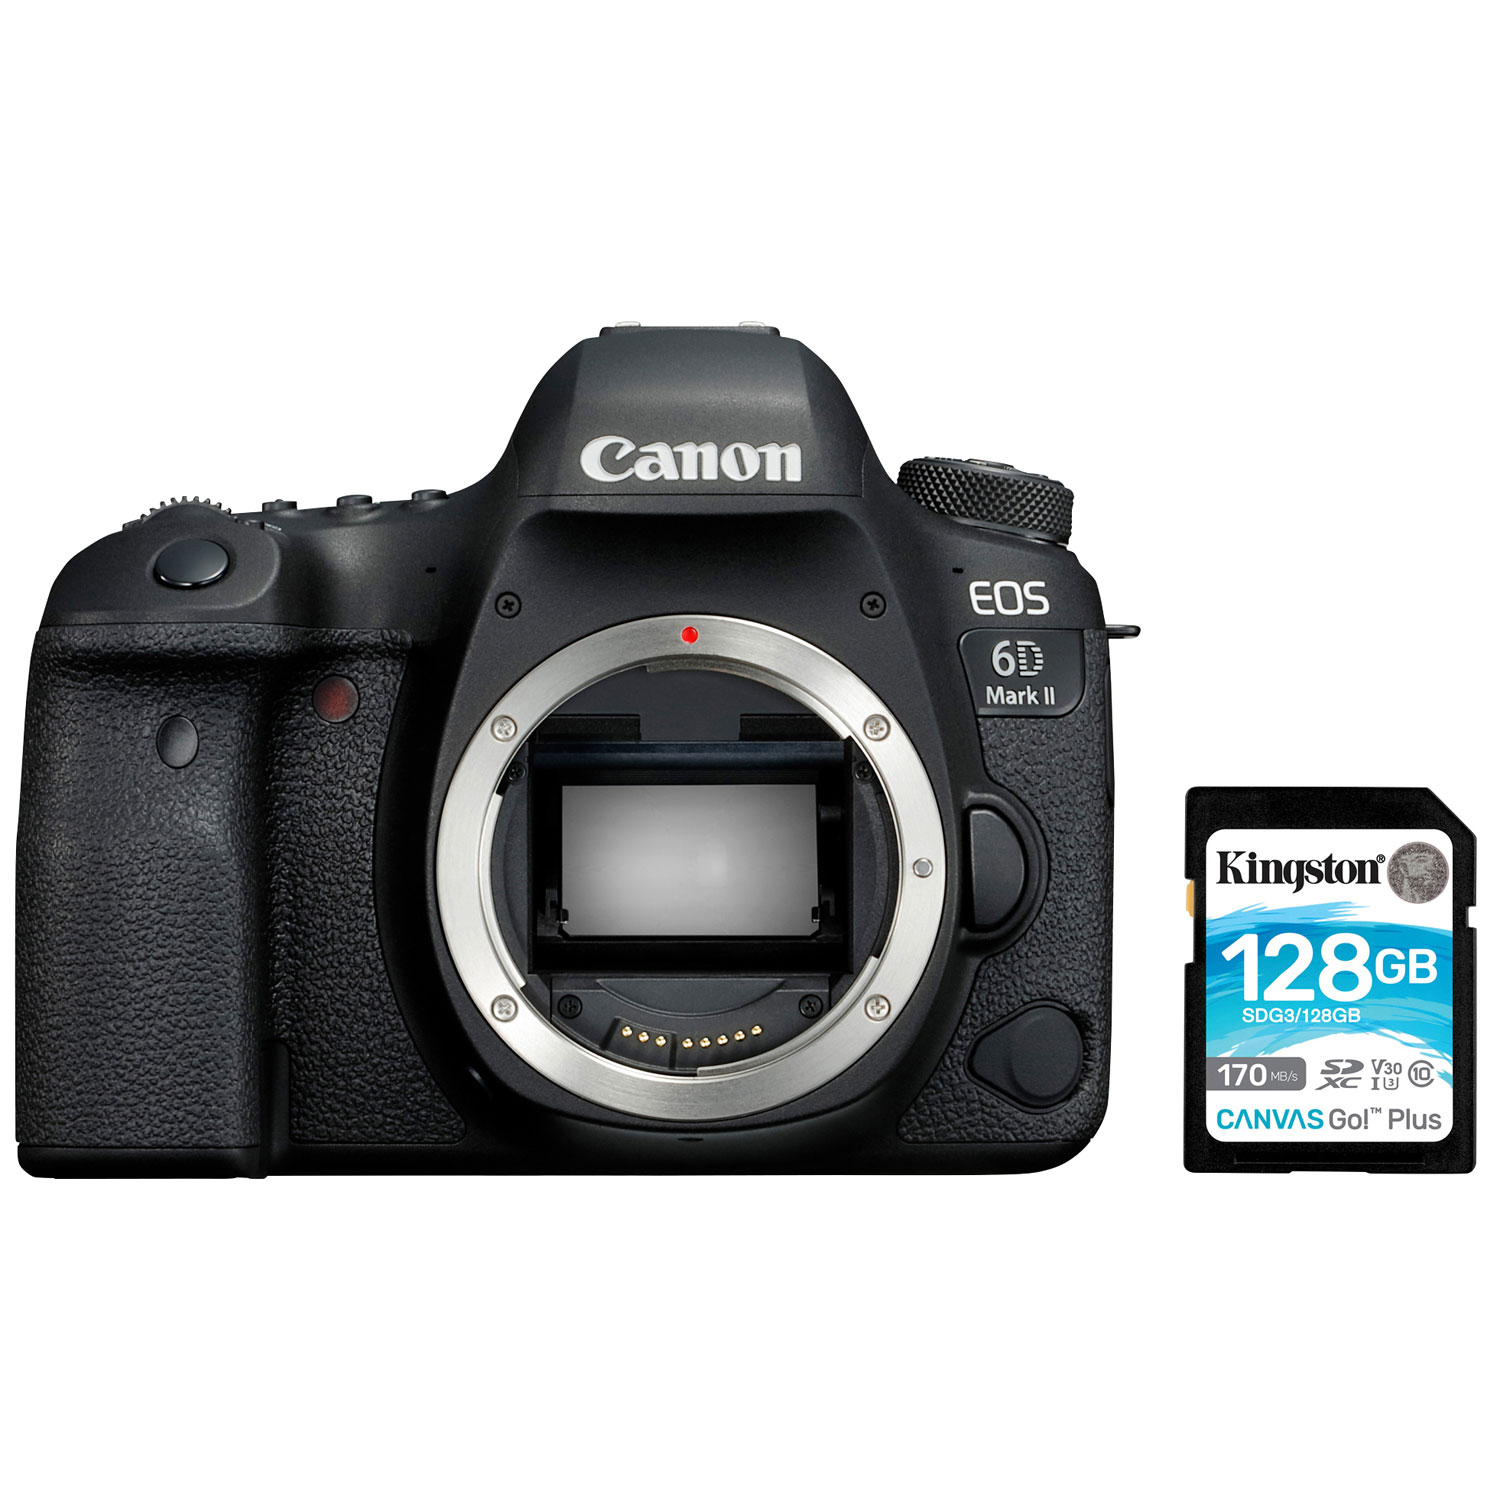 Canon EOS 6D Mark II DSLR Full Frame DSLR Camera (Body Only) with 128GB Memory Card